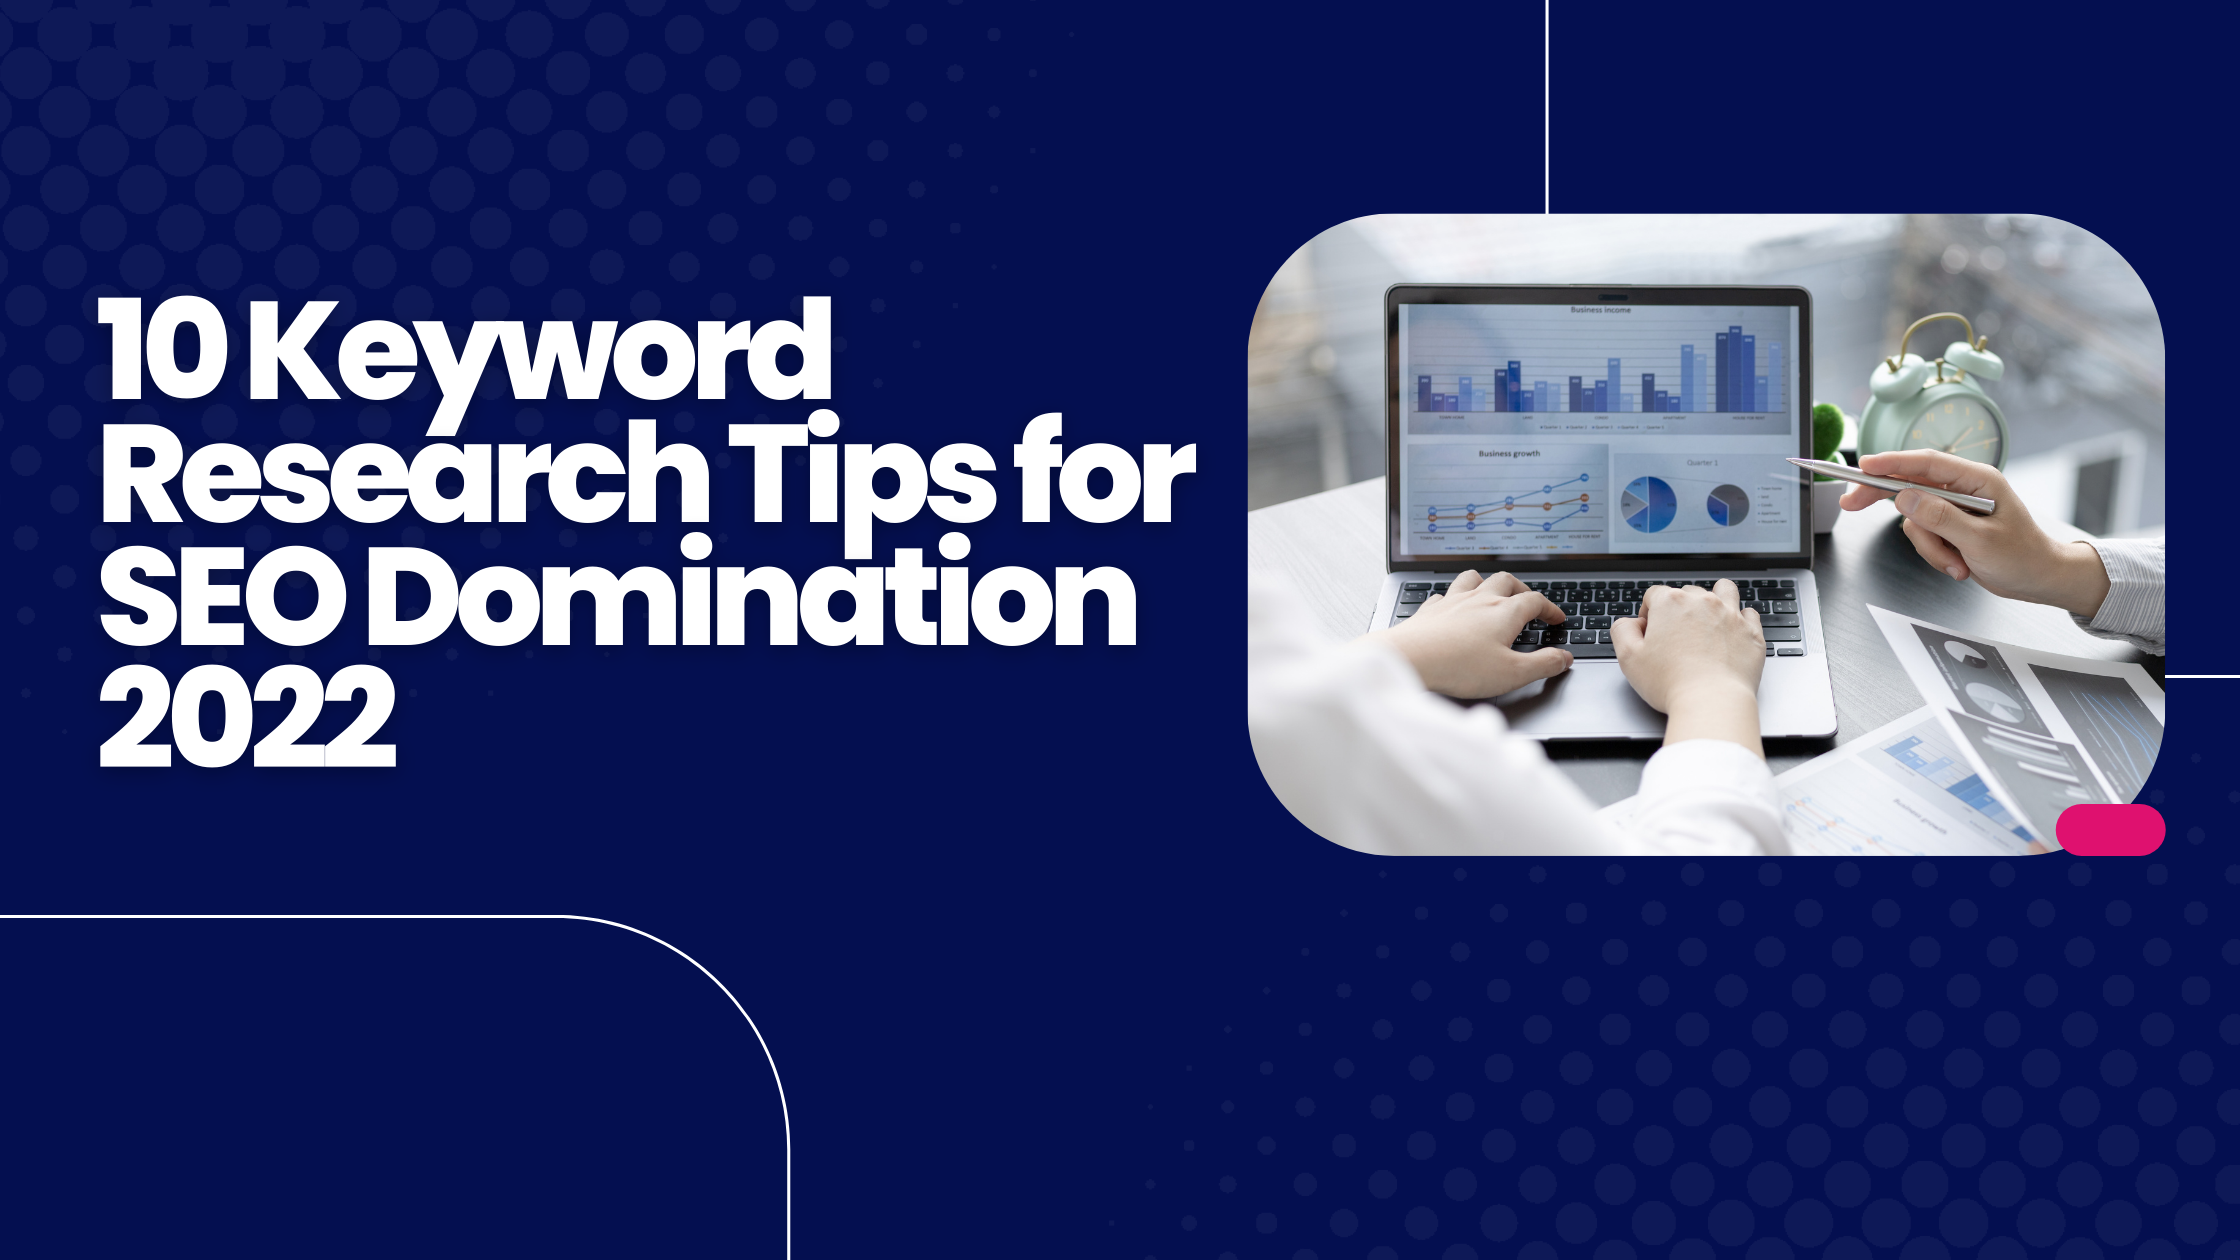 10 Keyword Research Tips for SEO Domination 2022